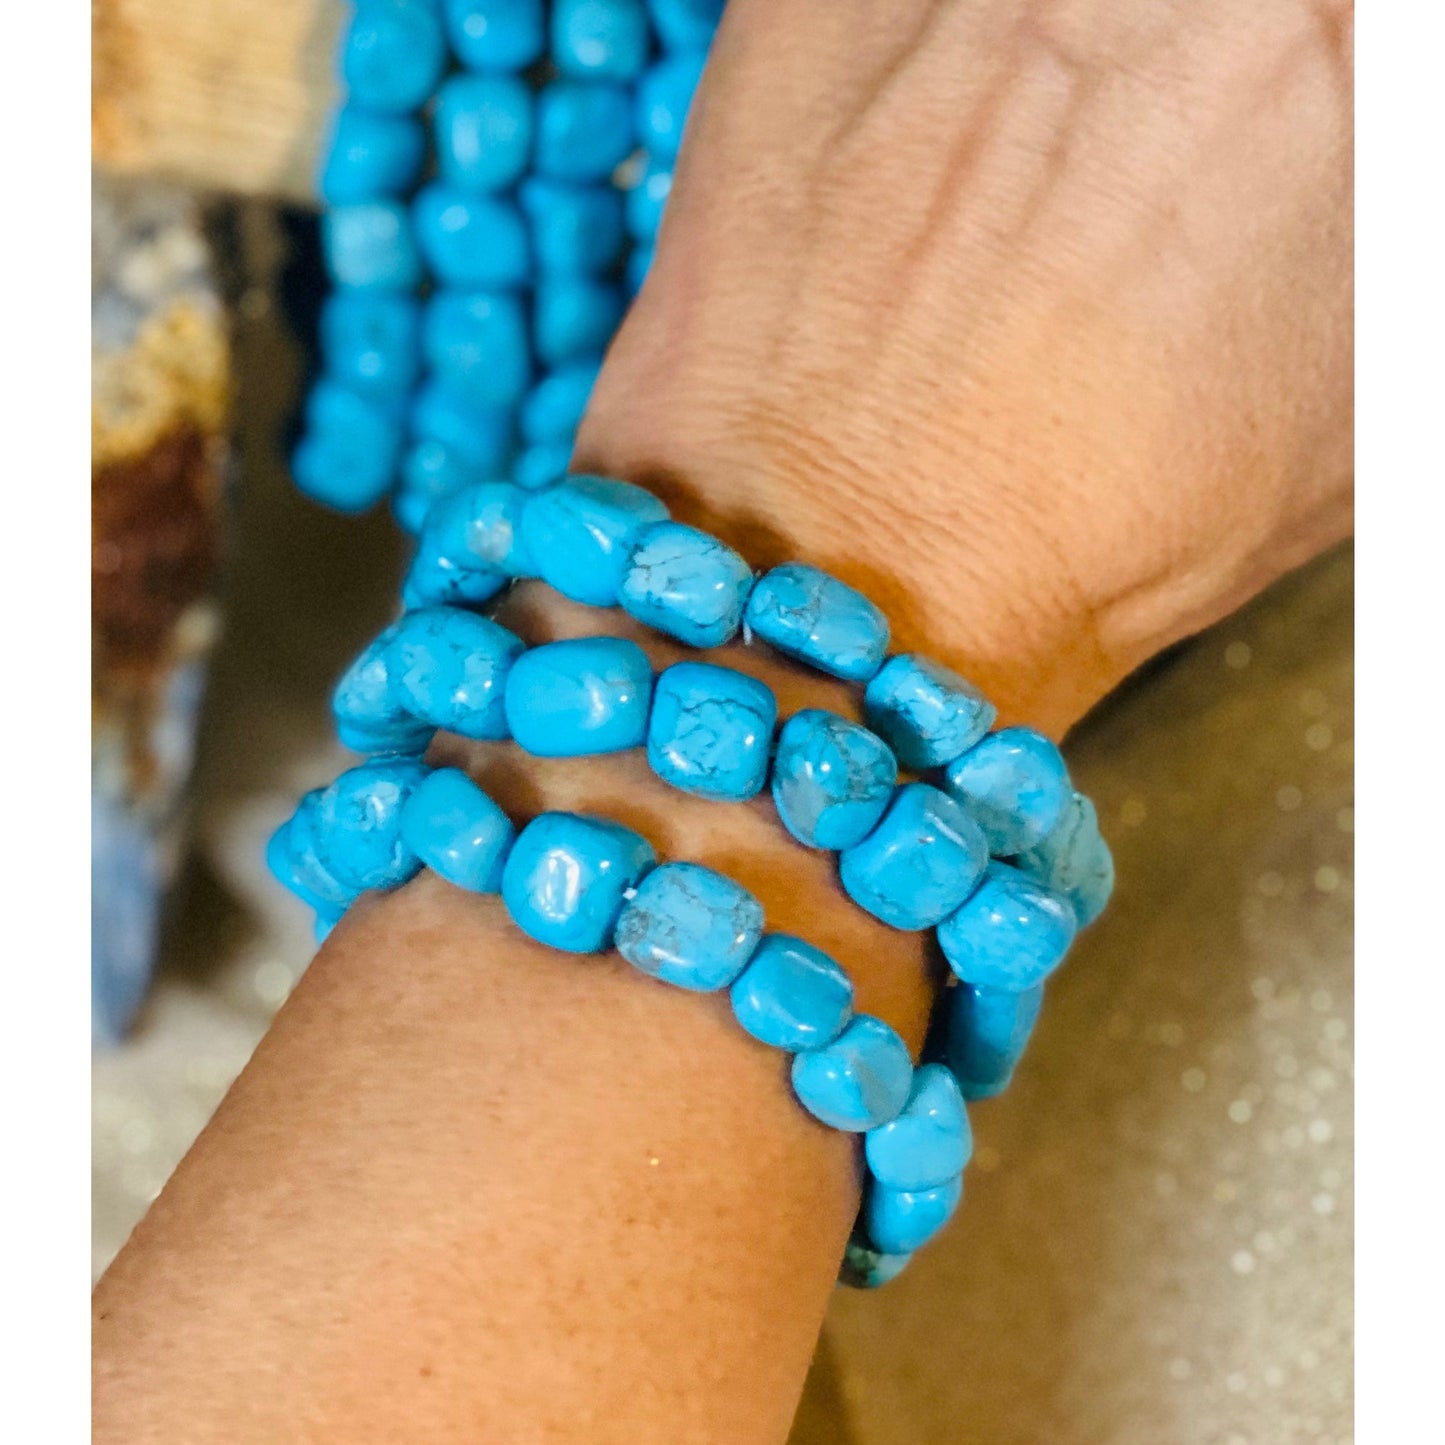 Natural Turquoise Howlite Chunk Crystal Bracelet for Calming